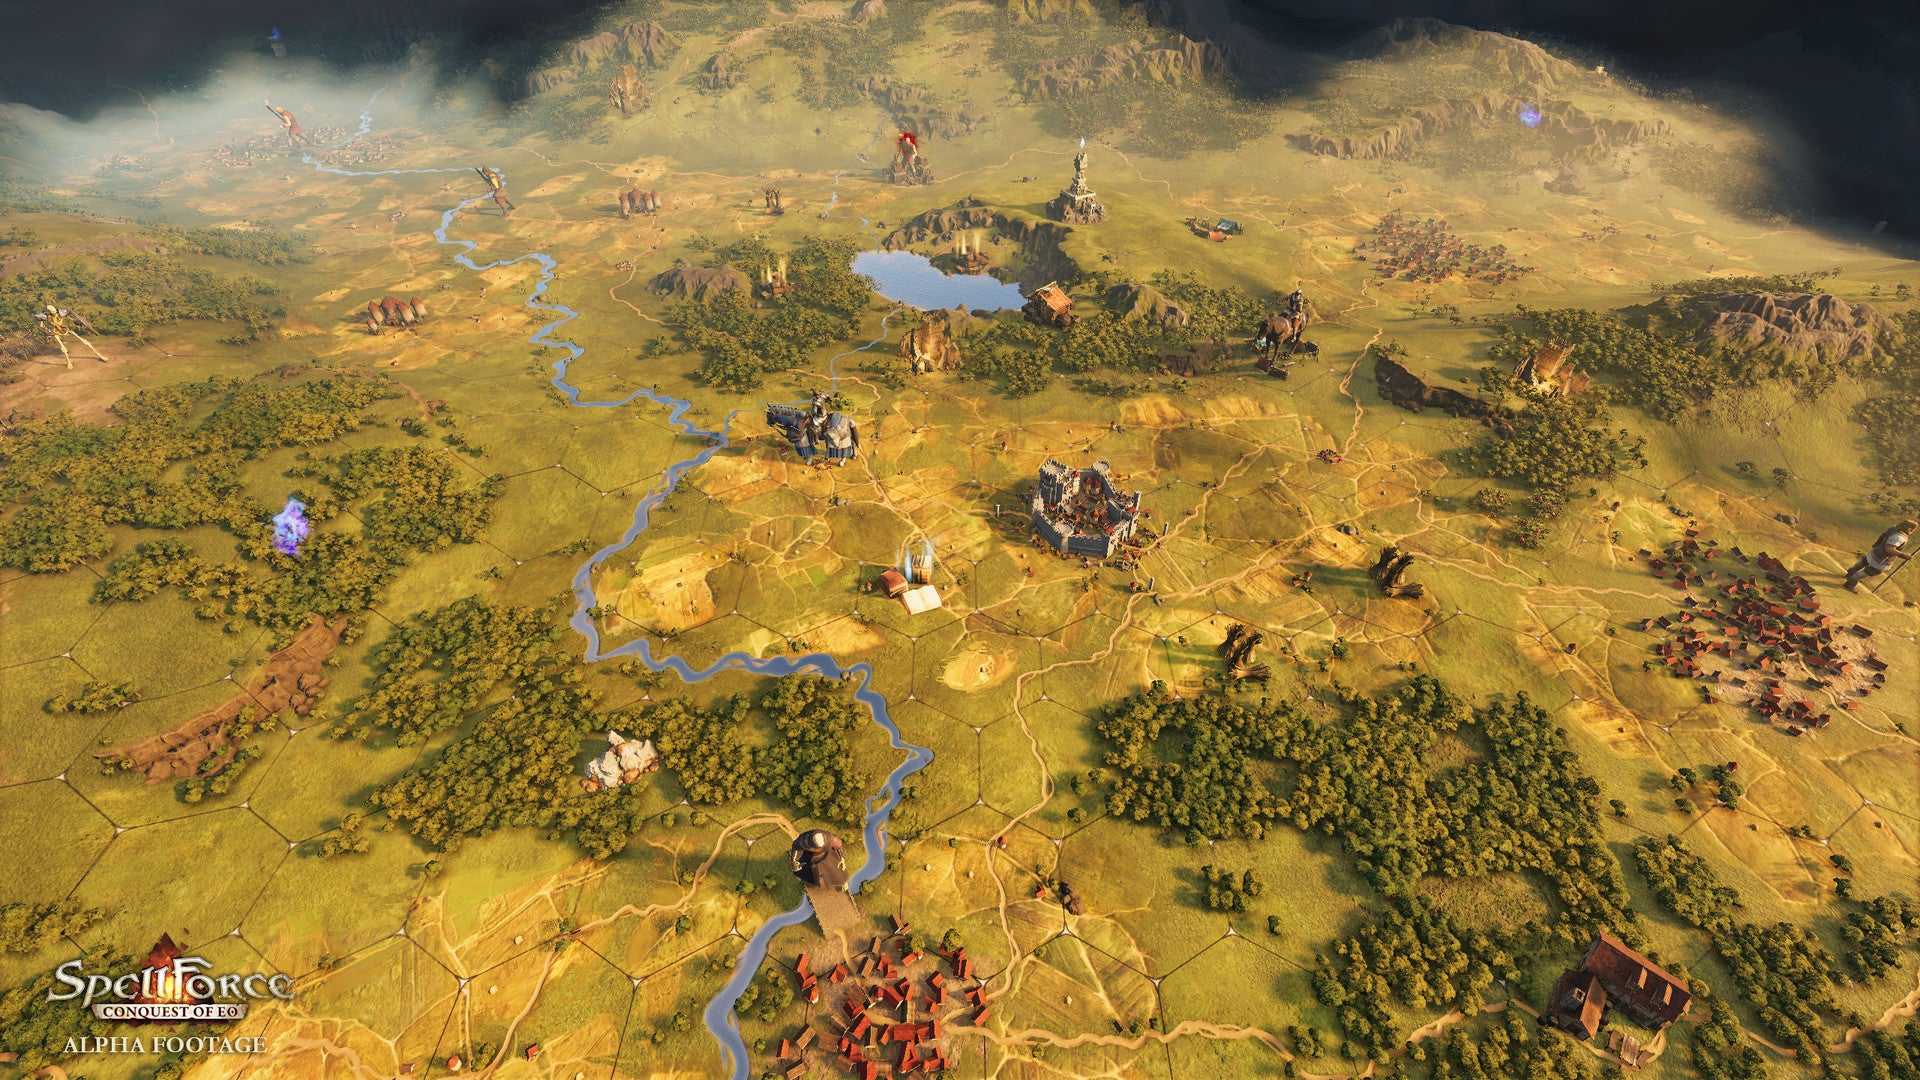 A wide shot of the intricate world map in SpellForce: Conquest Of Eo